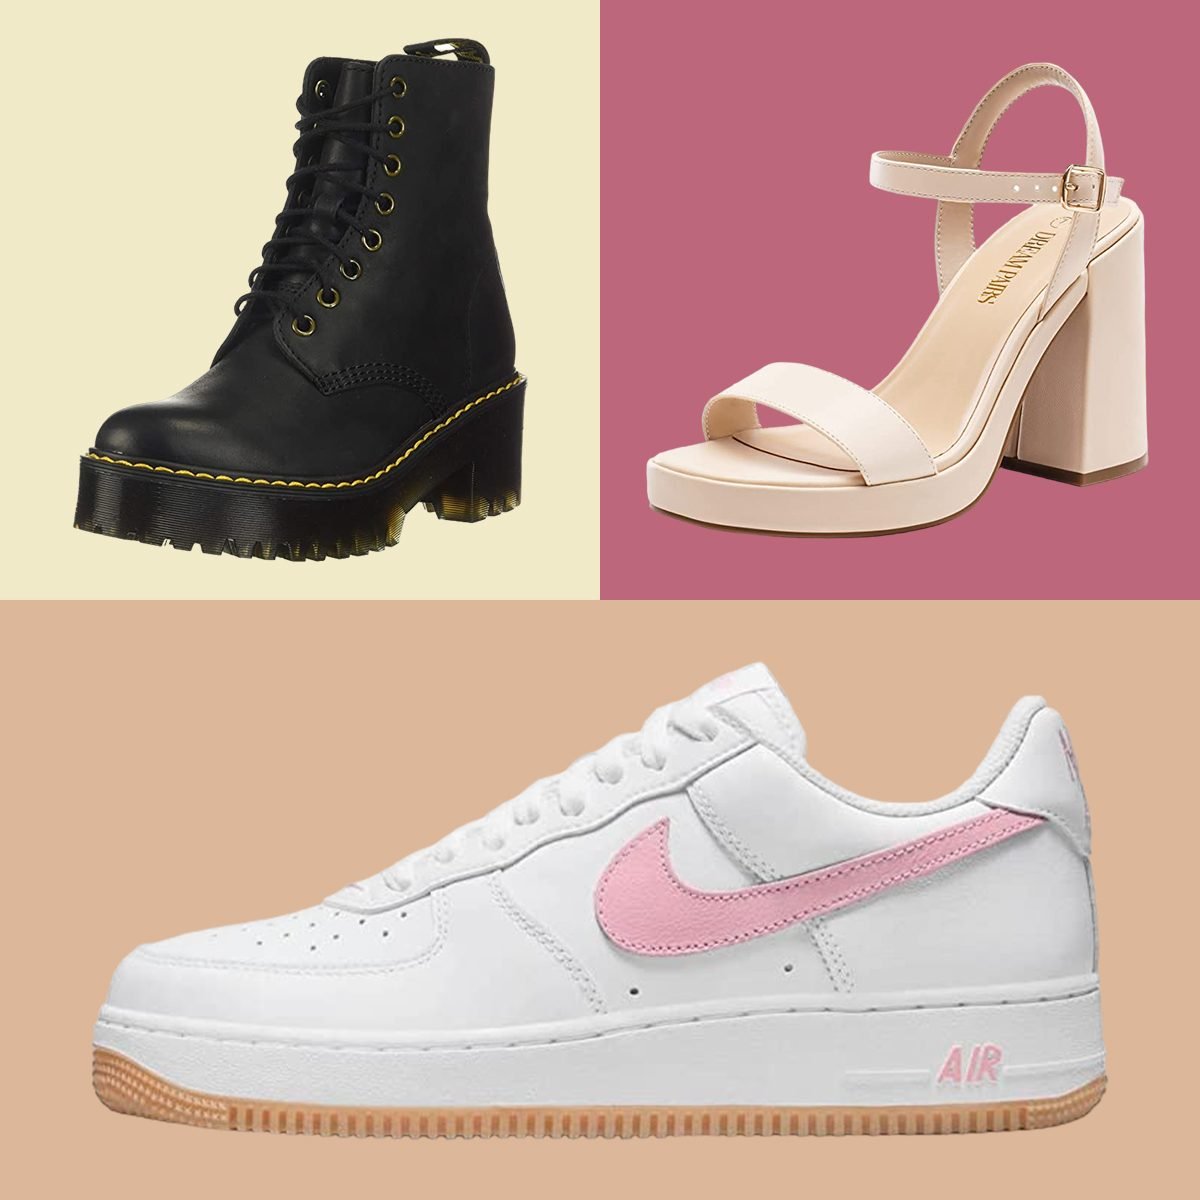 15 Summer Shoes for Women